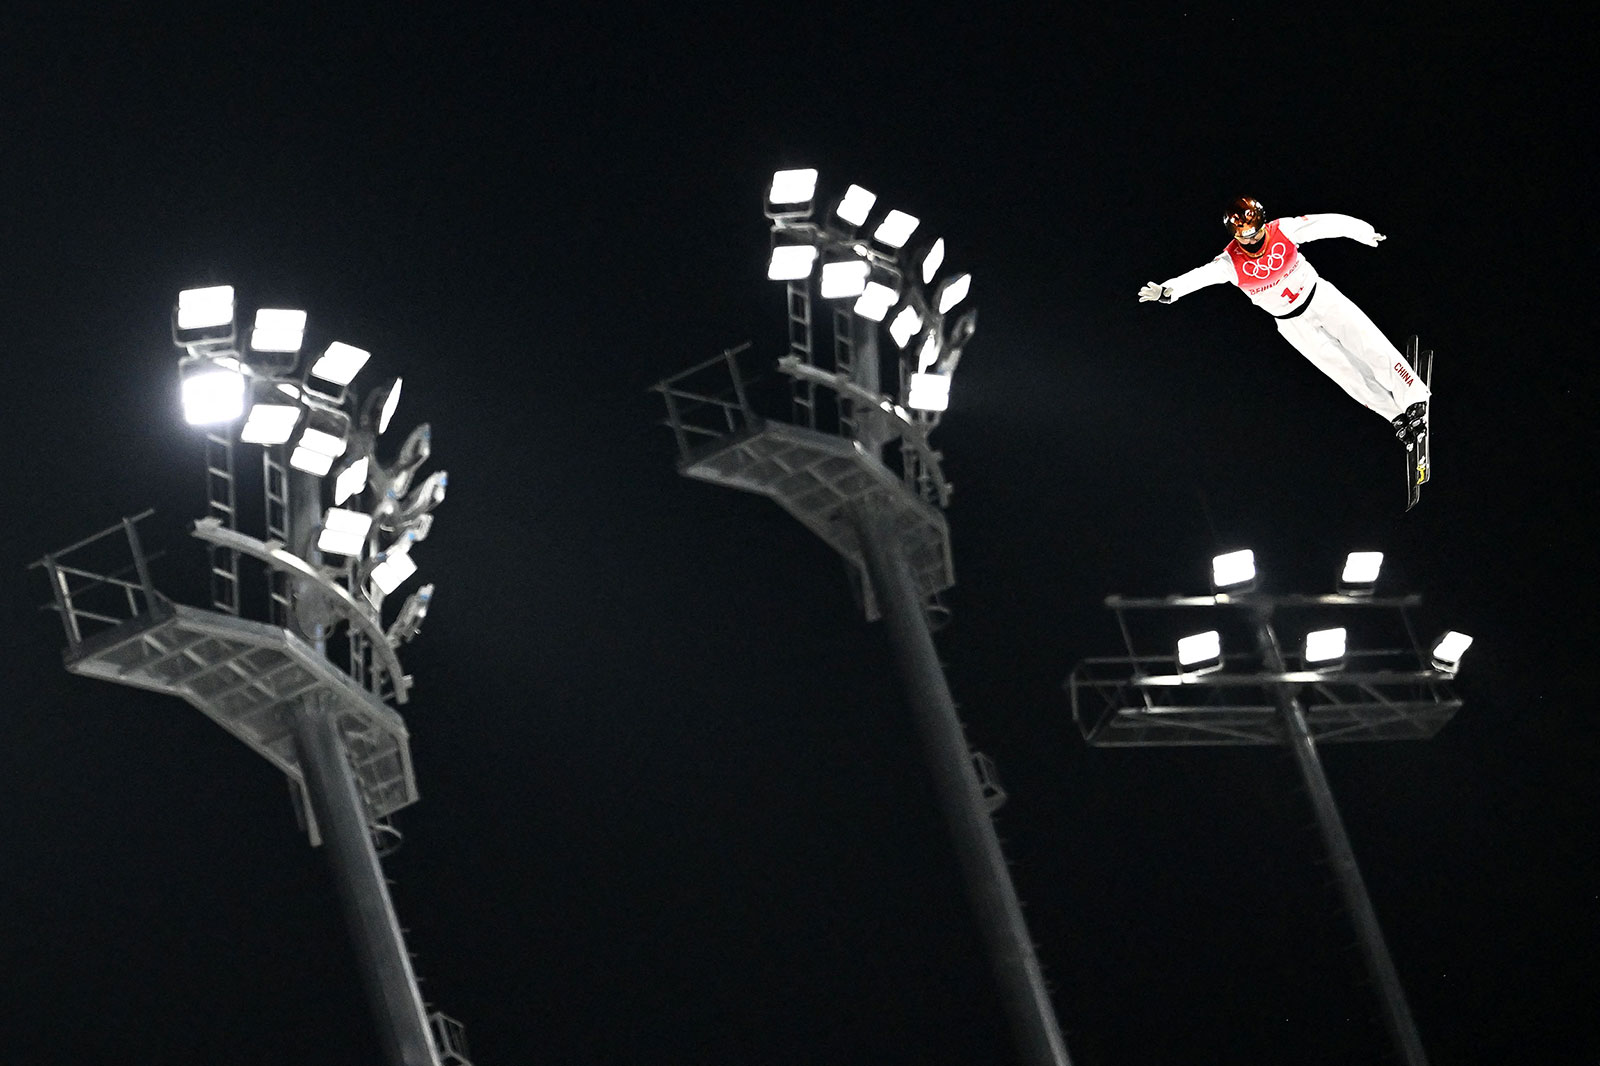 Chinese freestyle skier Xu Mengtao competes in the mixed team aerials final on February 10.